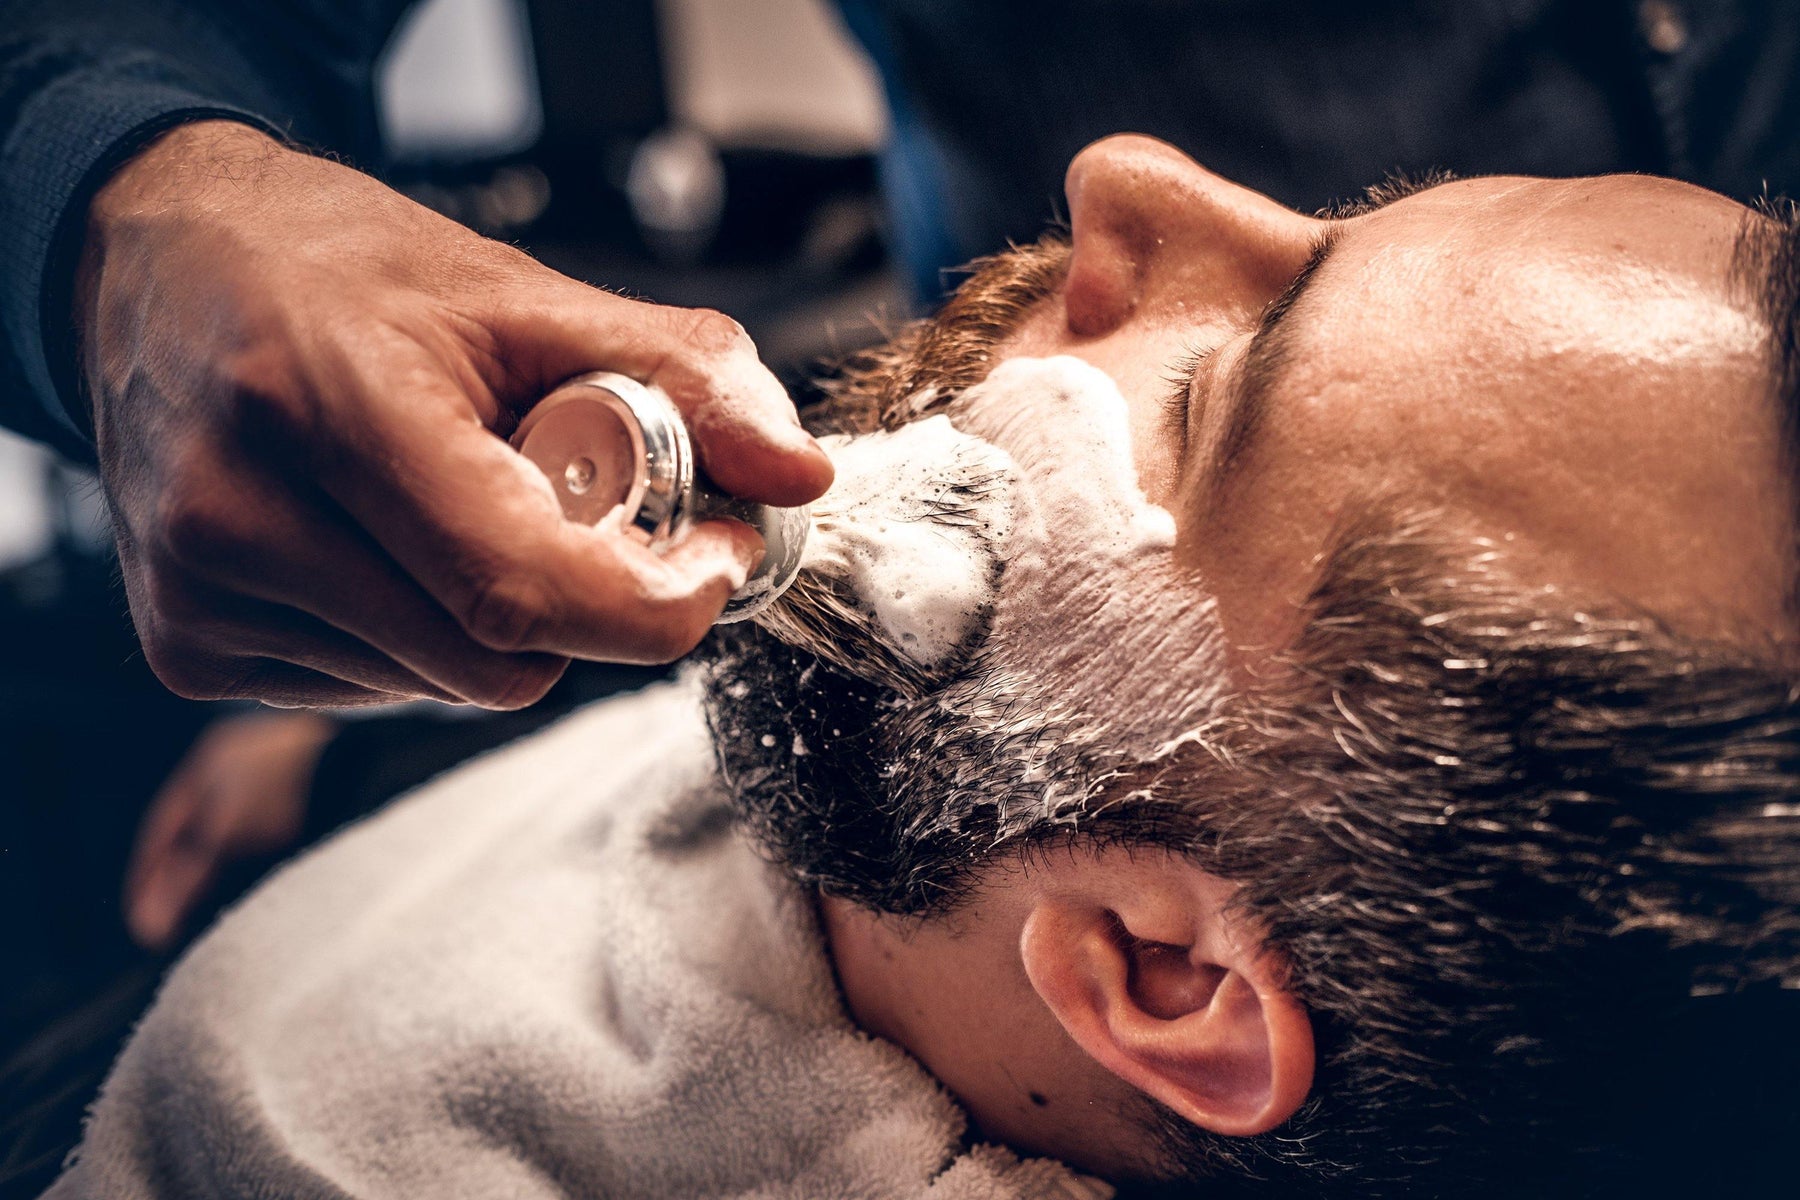 Best Shaving Soaps for a Classic Shave - New England Shaving Company